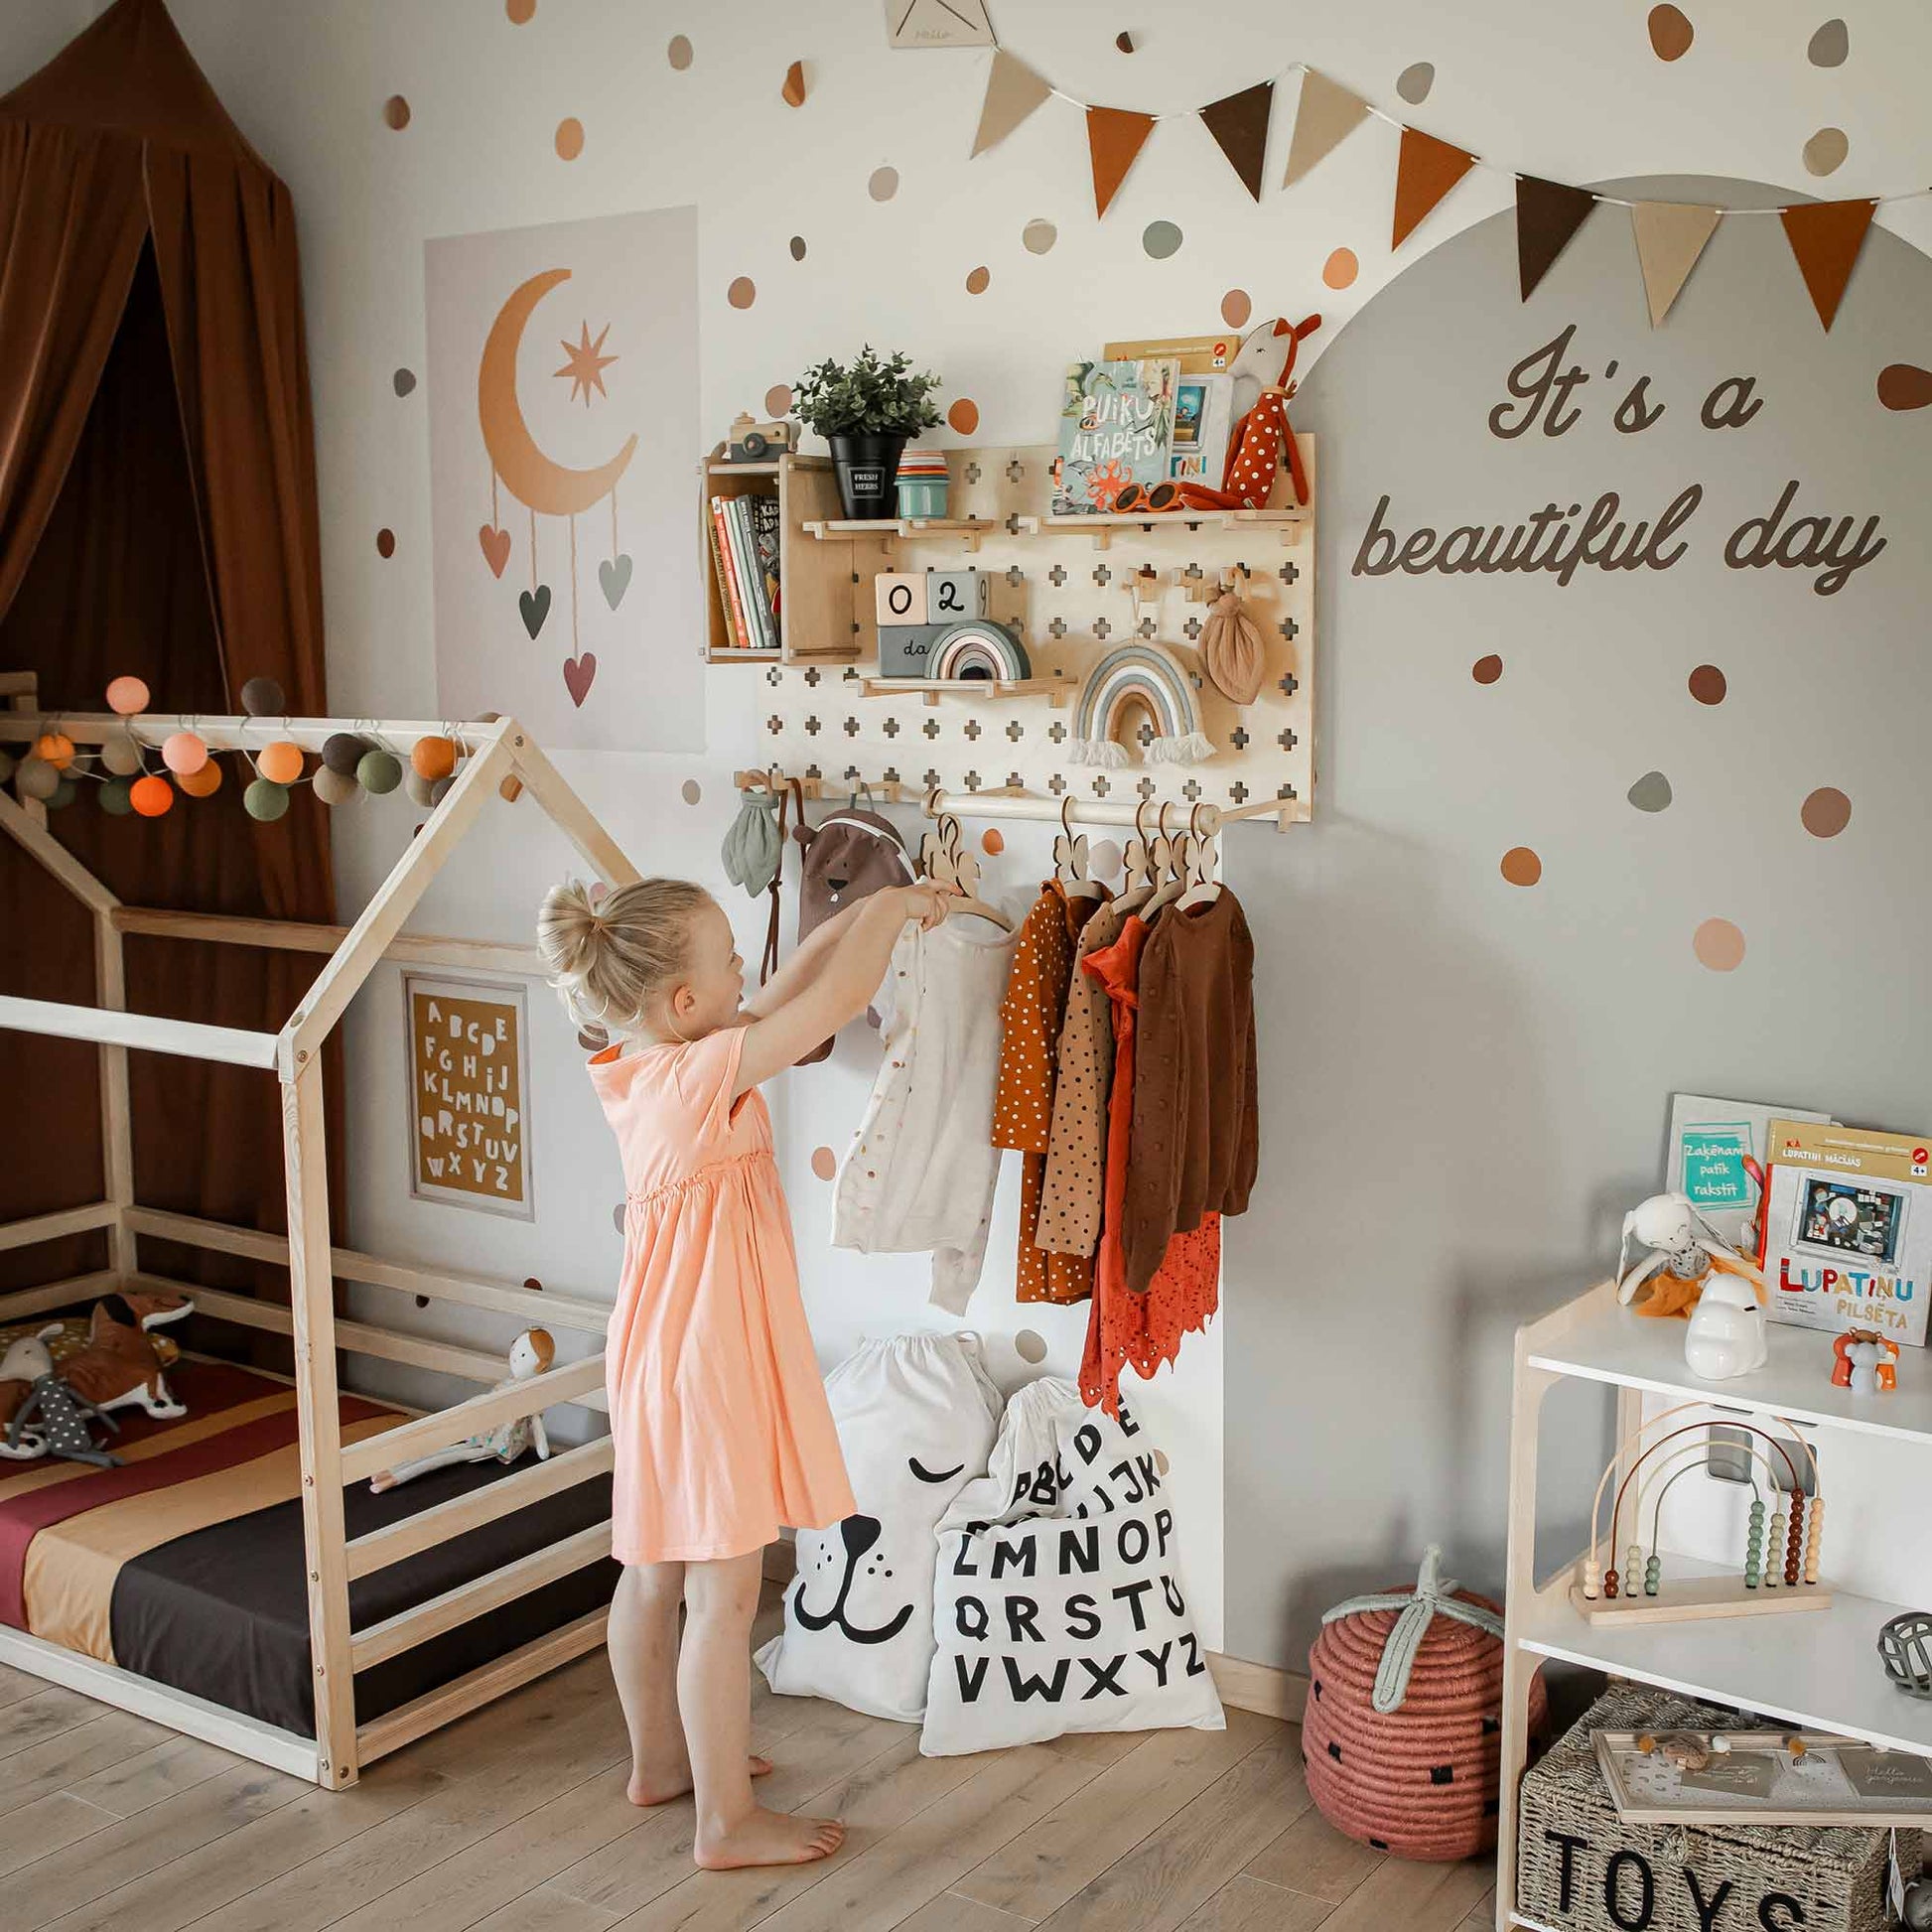 A young girl in a pink dress is reaching for clothes on a rack in a colorful, well-decorated children's room with wall decorations, toys, and a daybed. The room features a Pegboard with Clothes Hanger for extra storage space. The wall reads "It's a beautiful day.